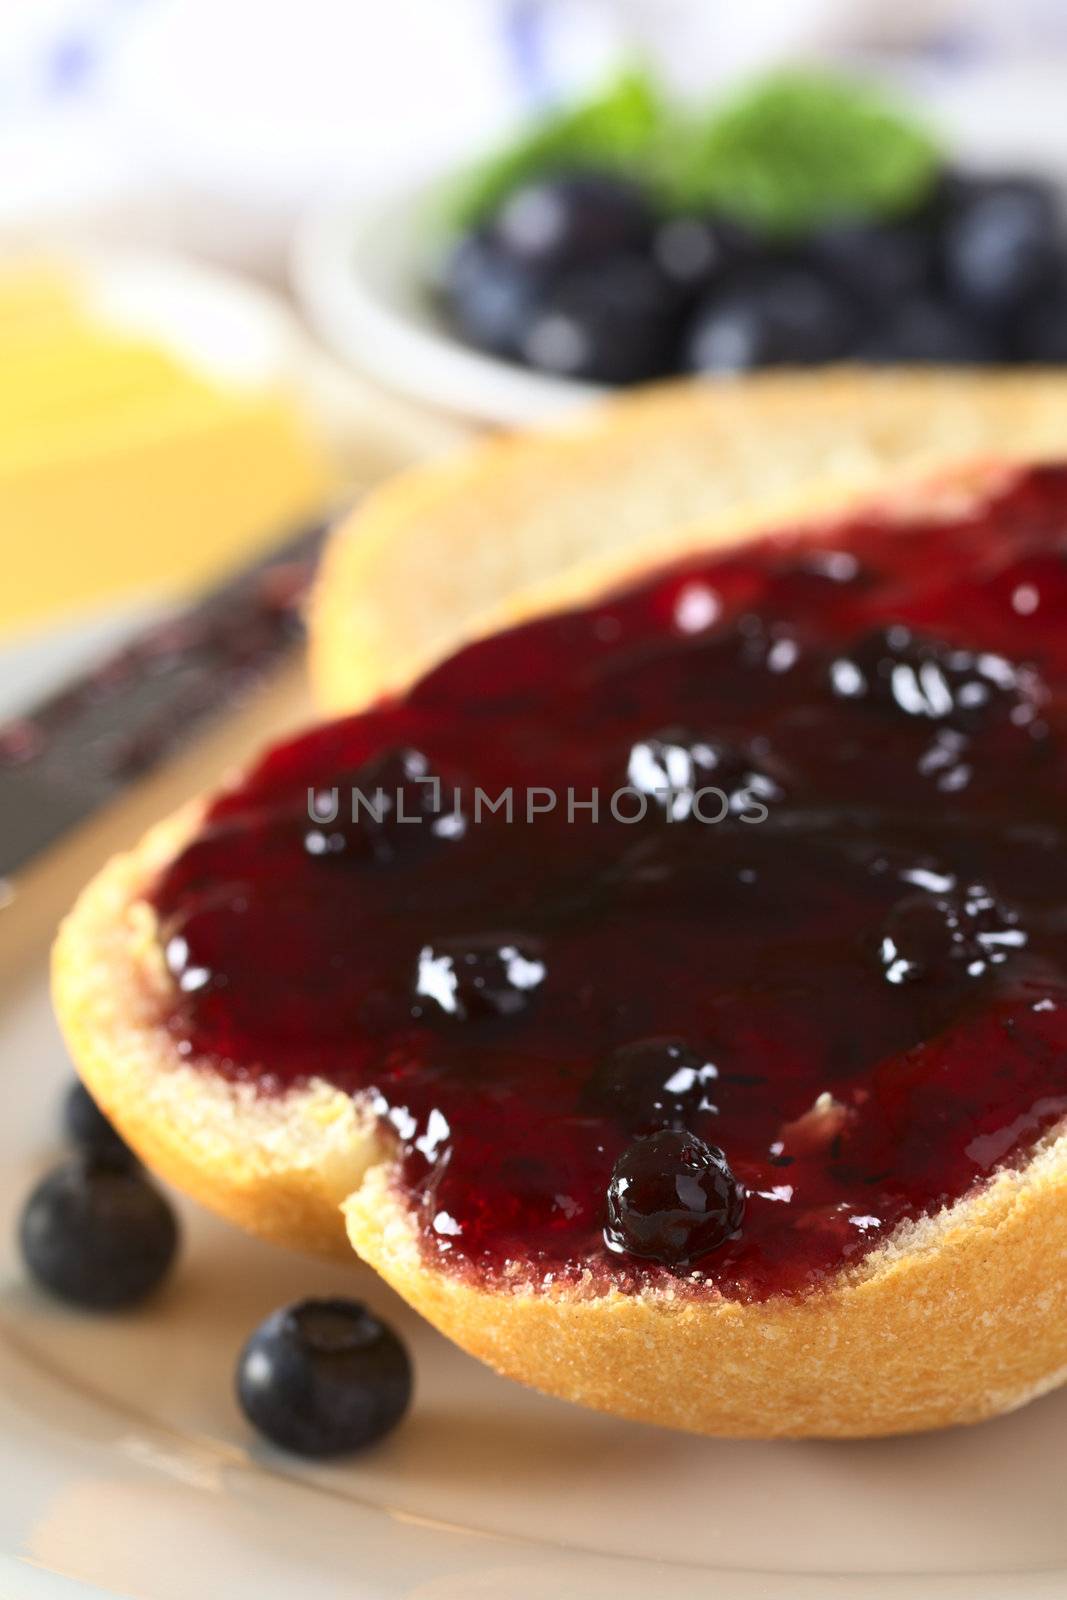 Blueberry jam on half a bun with butter and fresh blueberries in the back (Selective Focus, Focus on the front of the bun and jam)